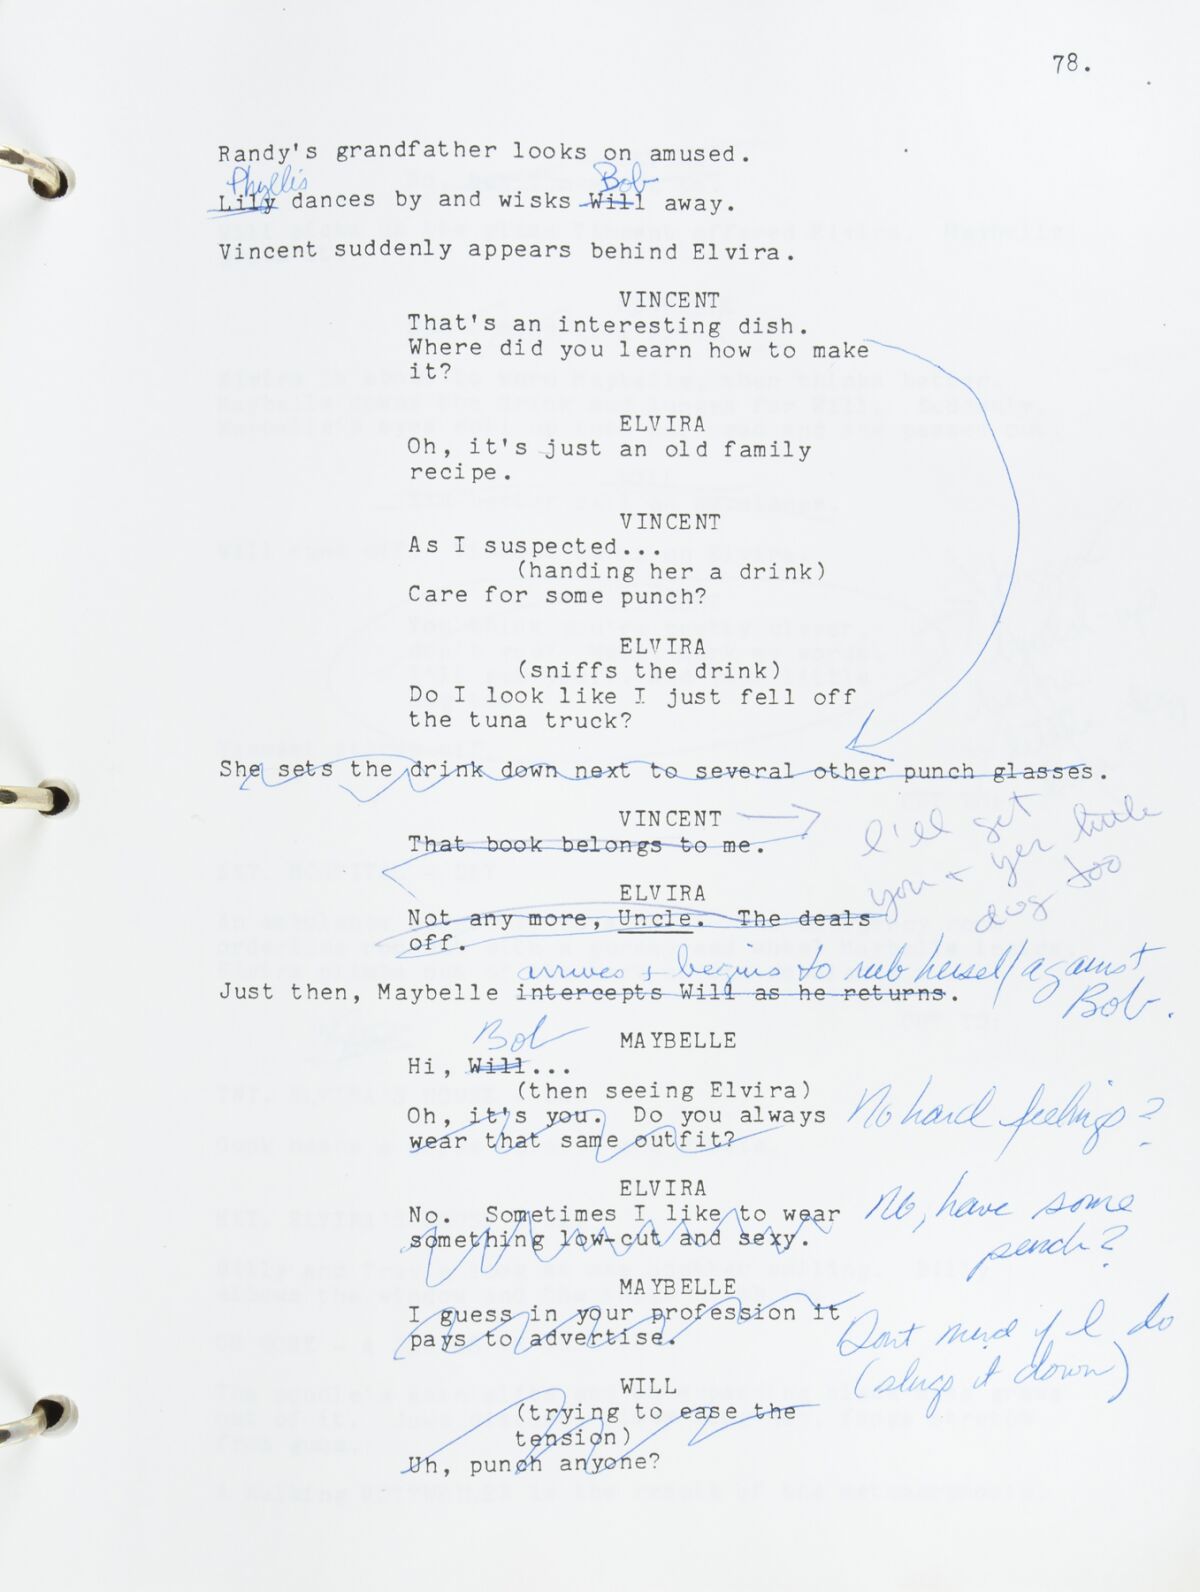 A page of the "Mistress of the Dark" script